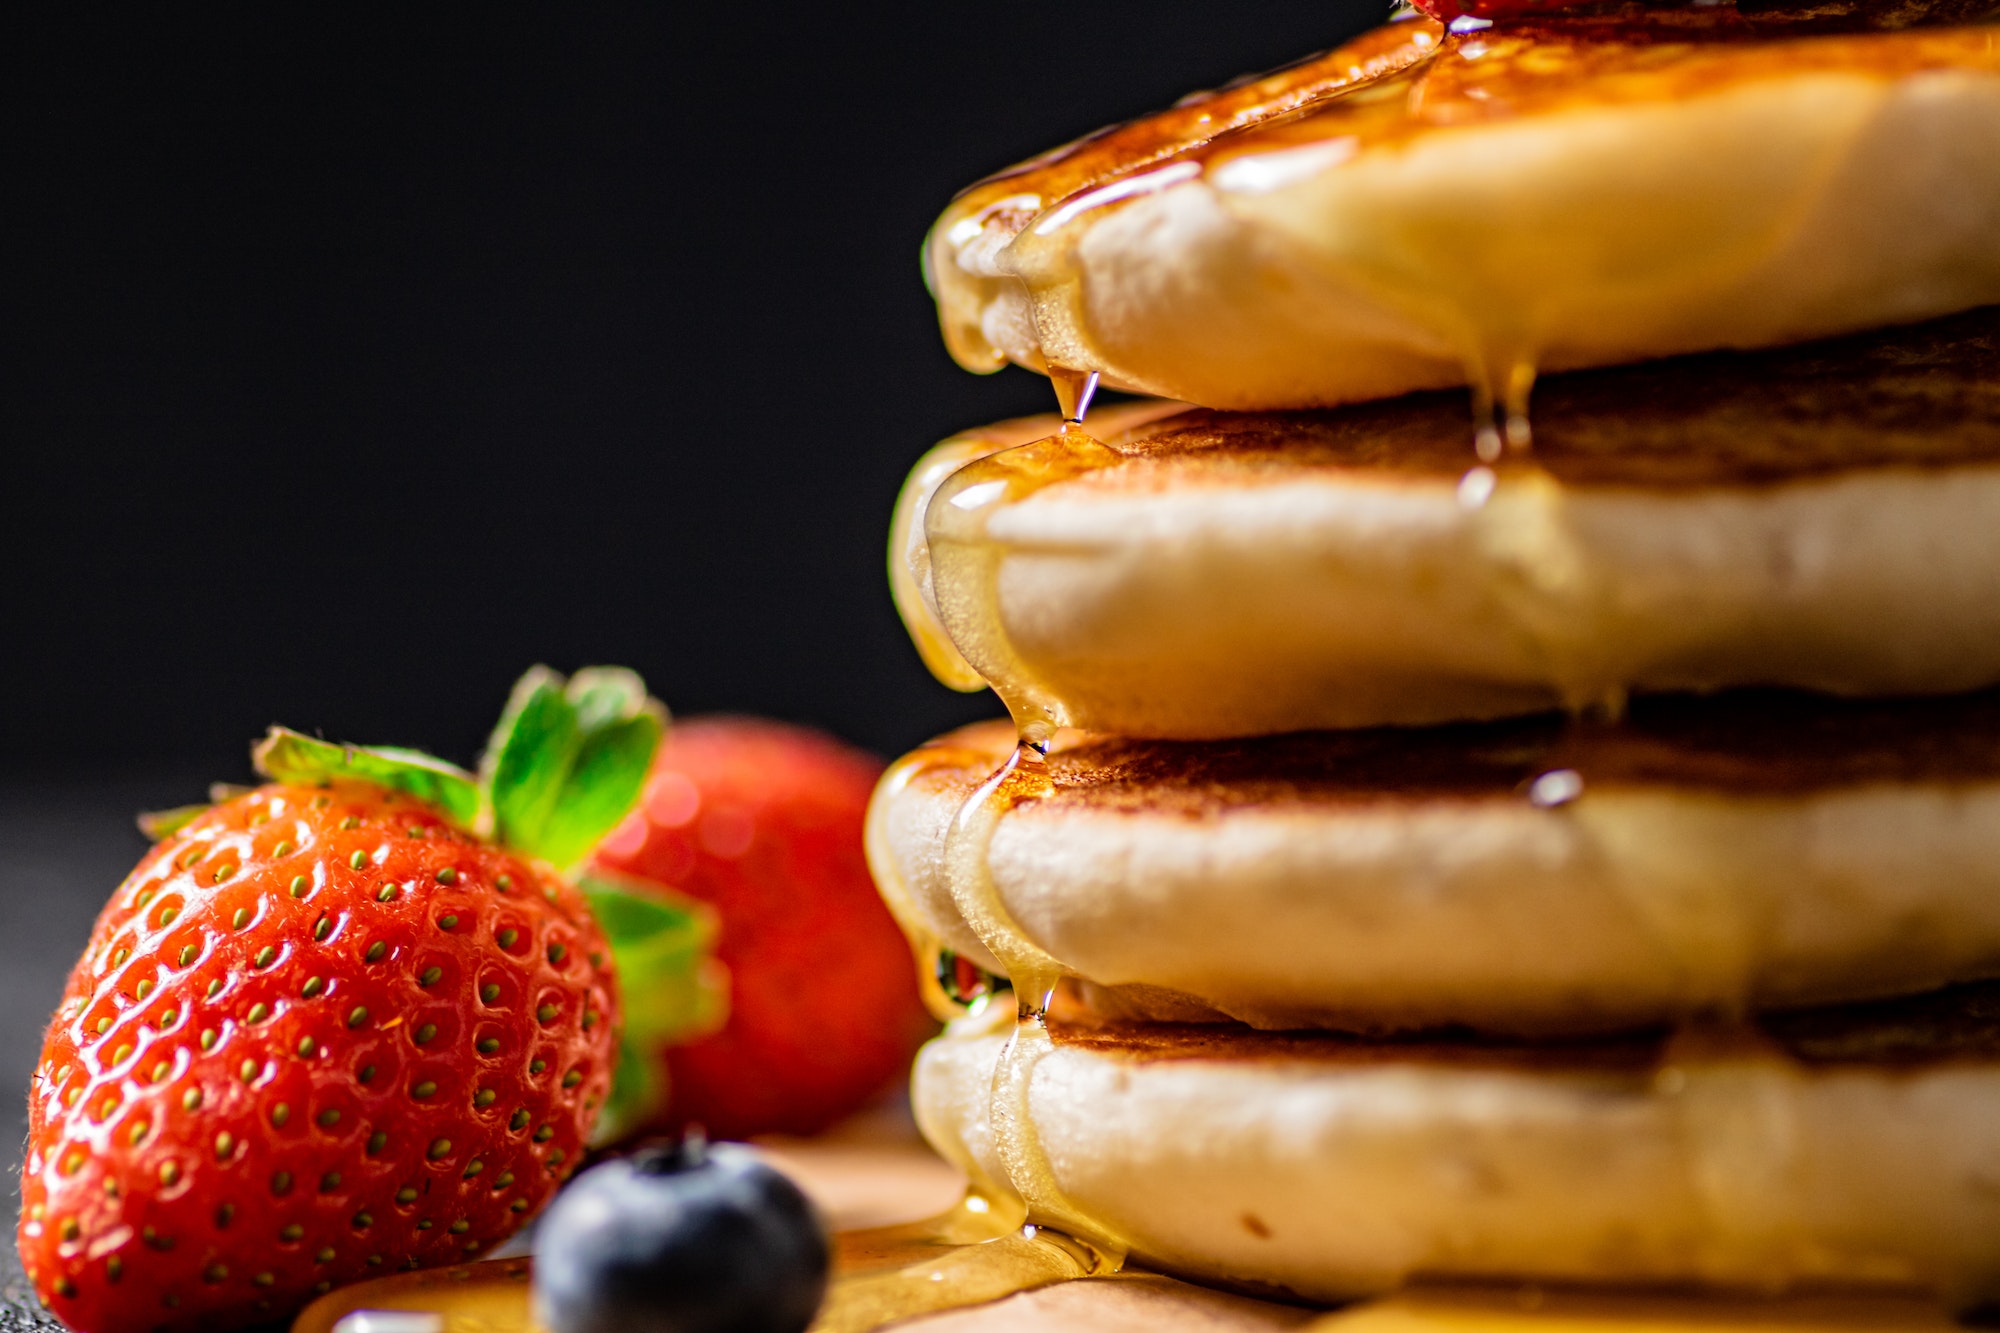 A pile of pancakes with berries and honey.